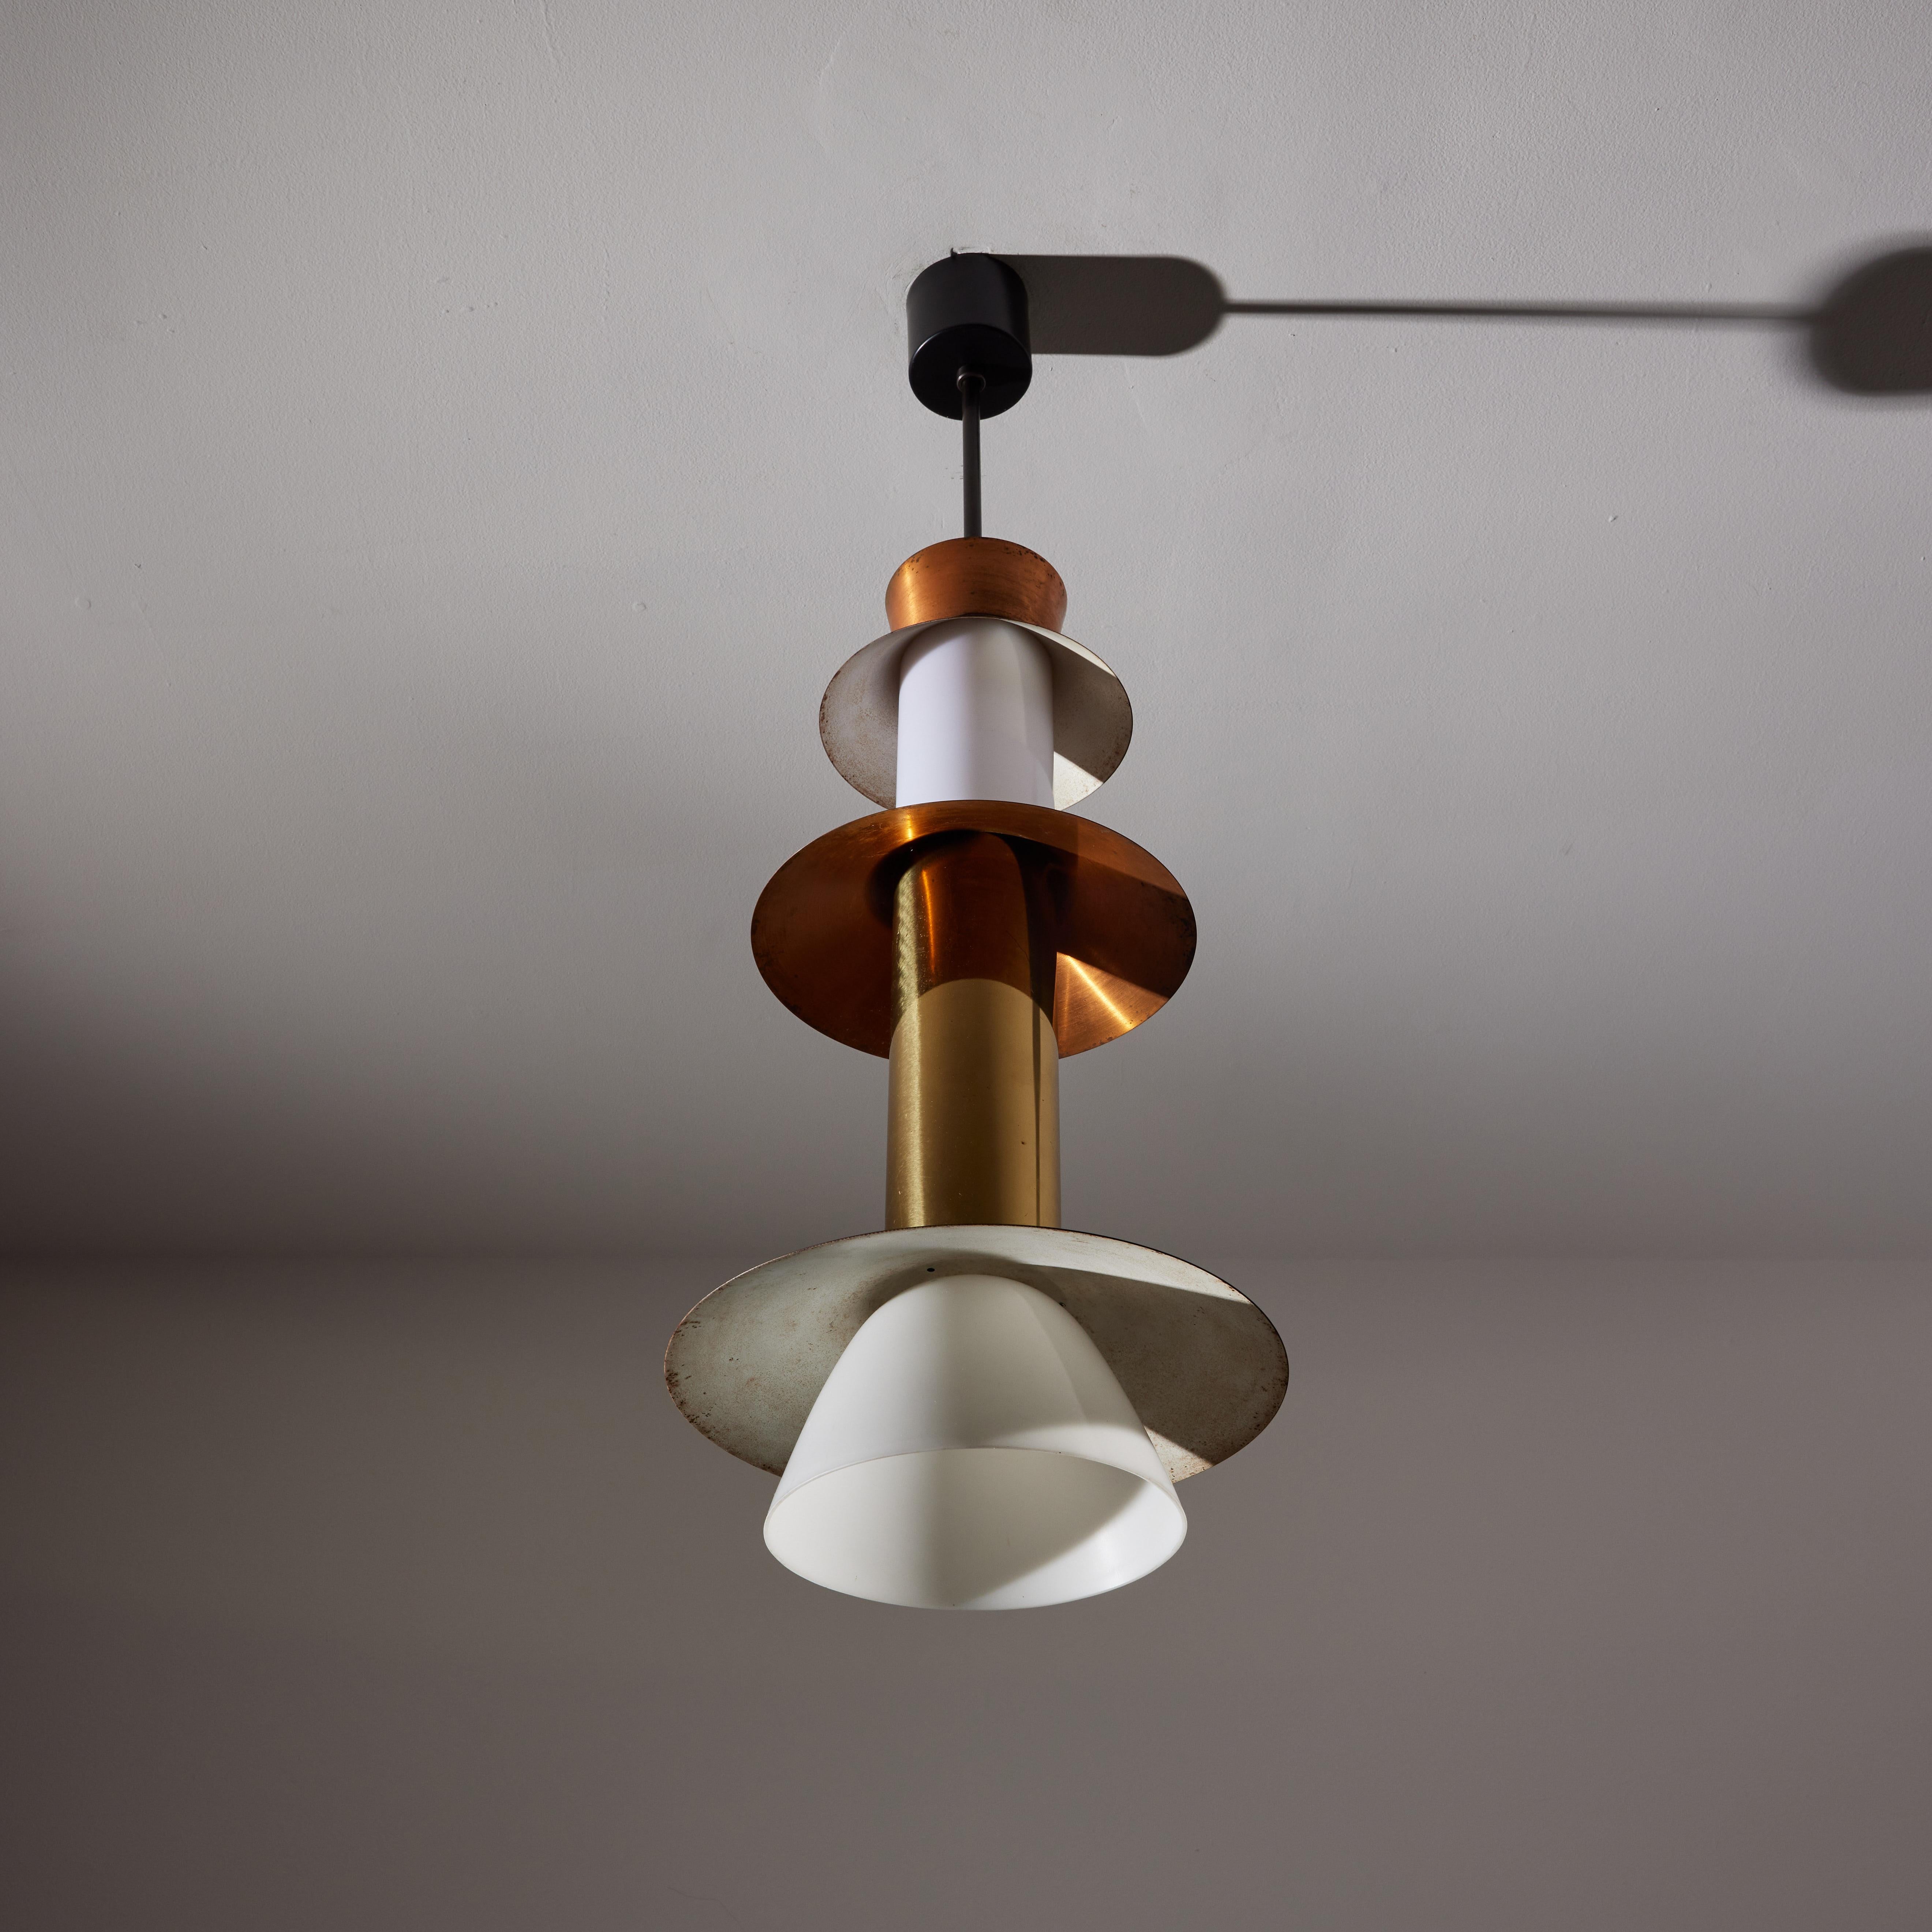 Mid-20th Century Ceiling Light in the Style of Stilnovo